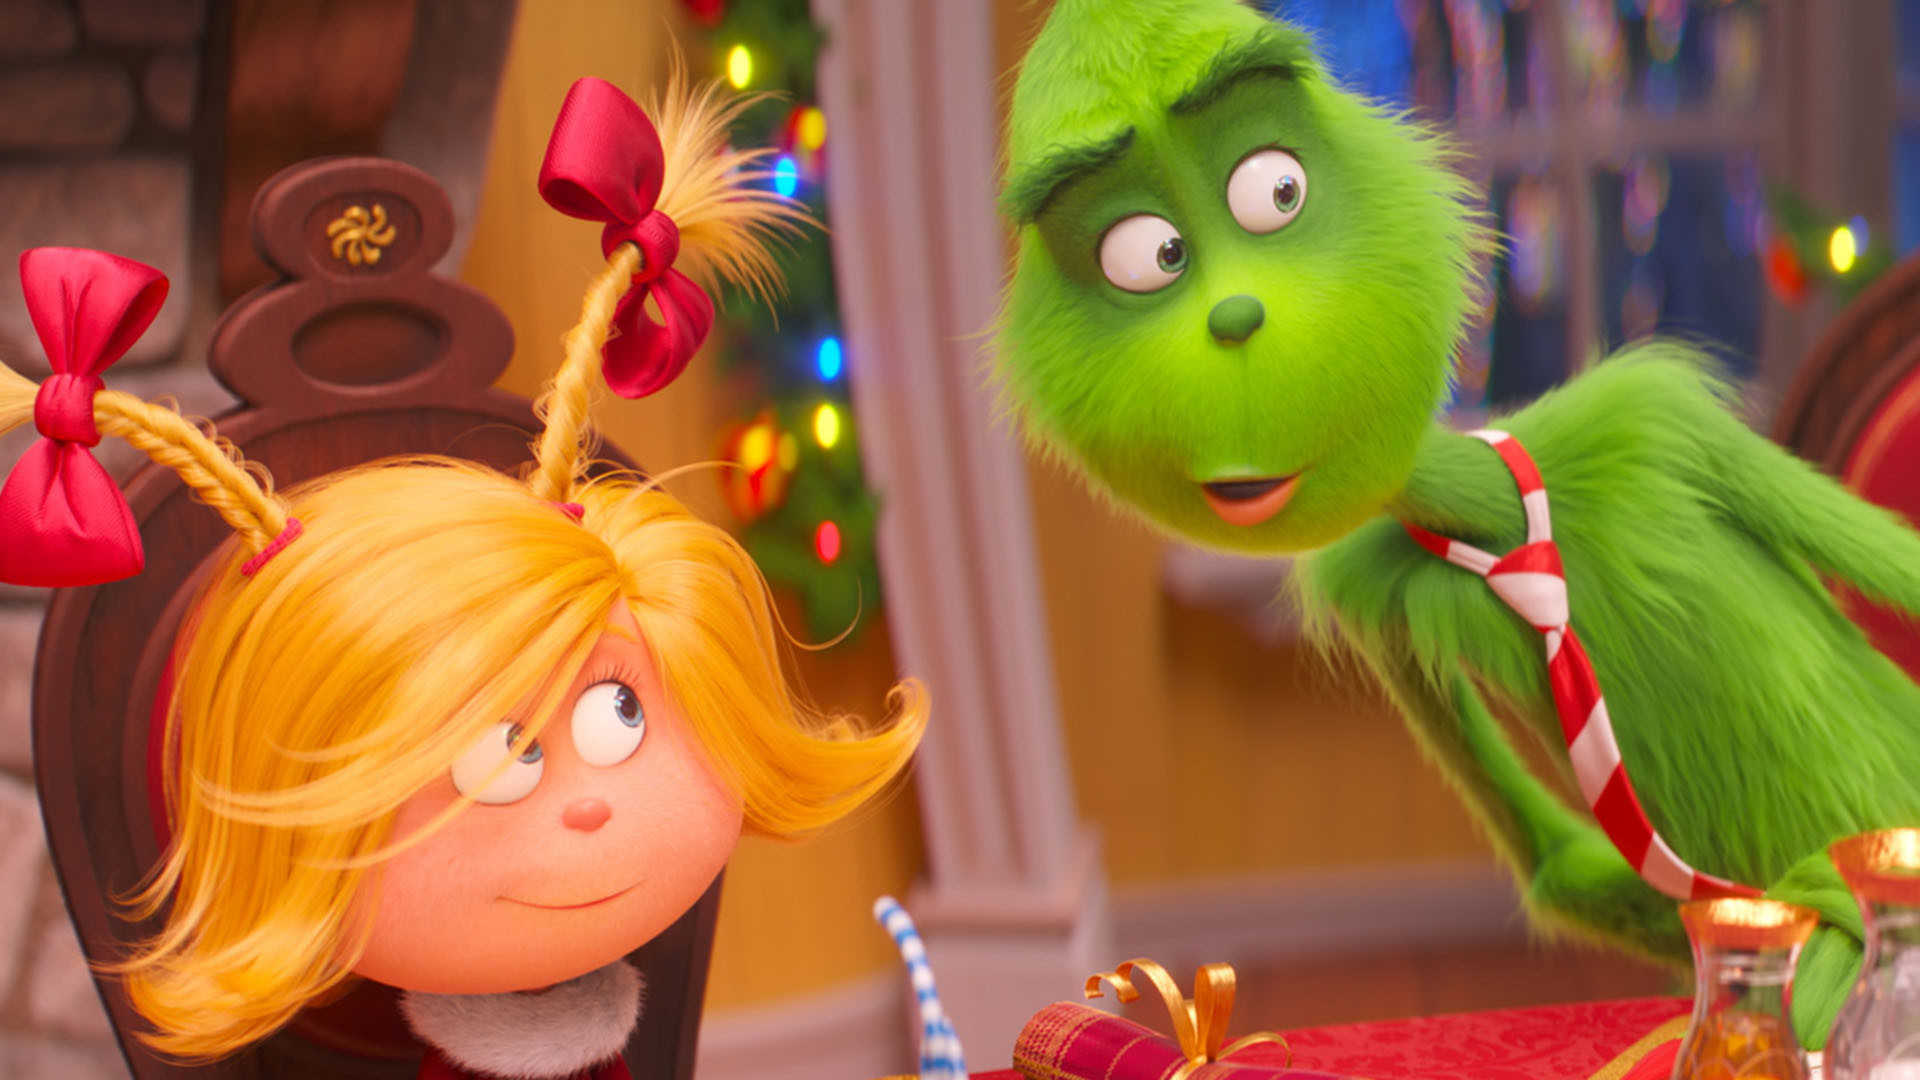 1920x1080 Cindy-Lou Prevents “The Grinch” From Stealing Christmas